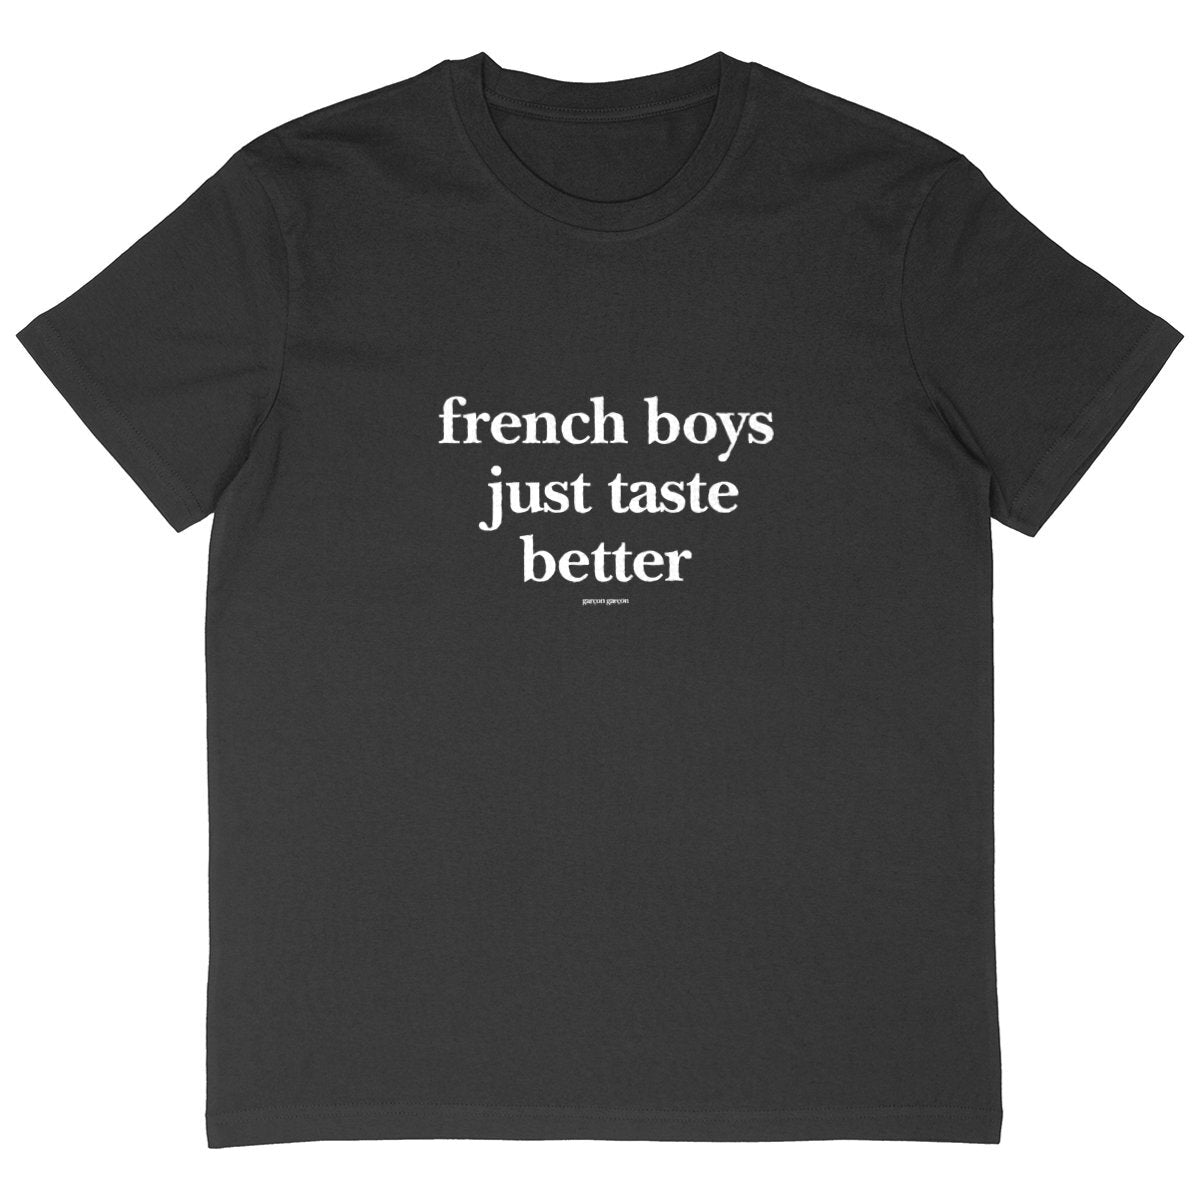 french boys BLACK OVERSIZED TEE; BLACK tee oversized.garçon garçon tee oversize BLACK. Dive into the essence of Parisian cool with this oversized tee. The subtle 'garçon garçon' signature whispers a chic narrative, offering a slice of the city's famed elegance. Perfect for those who speak style with simplicity.